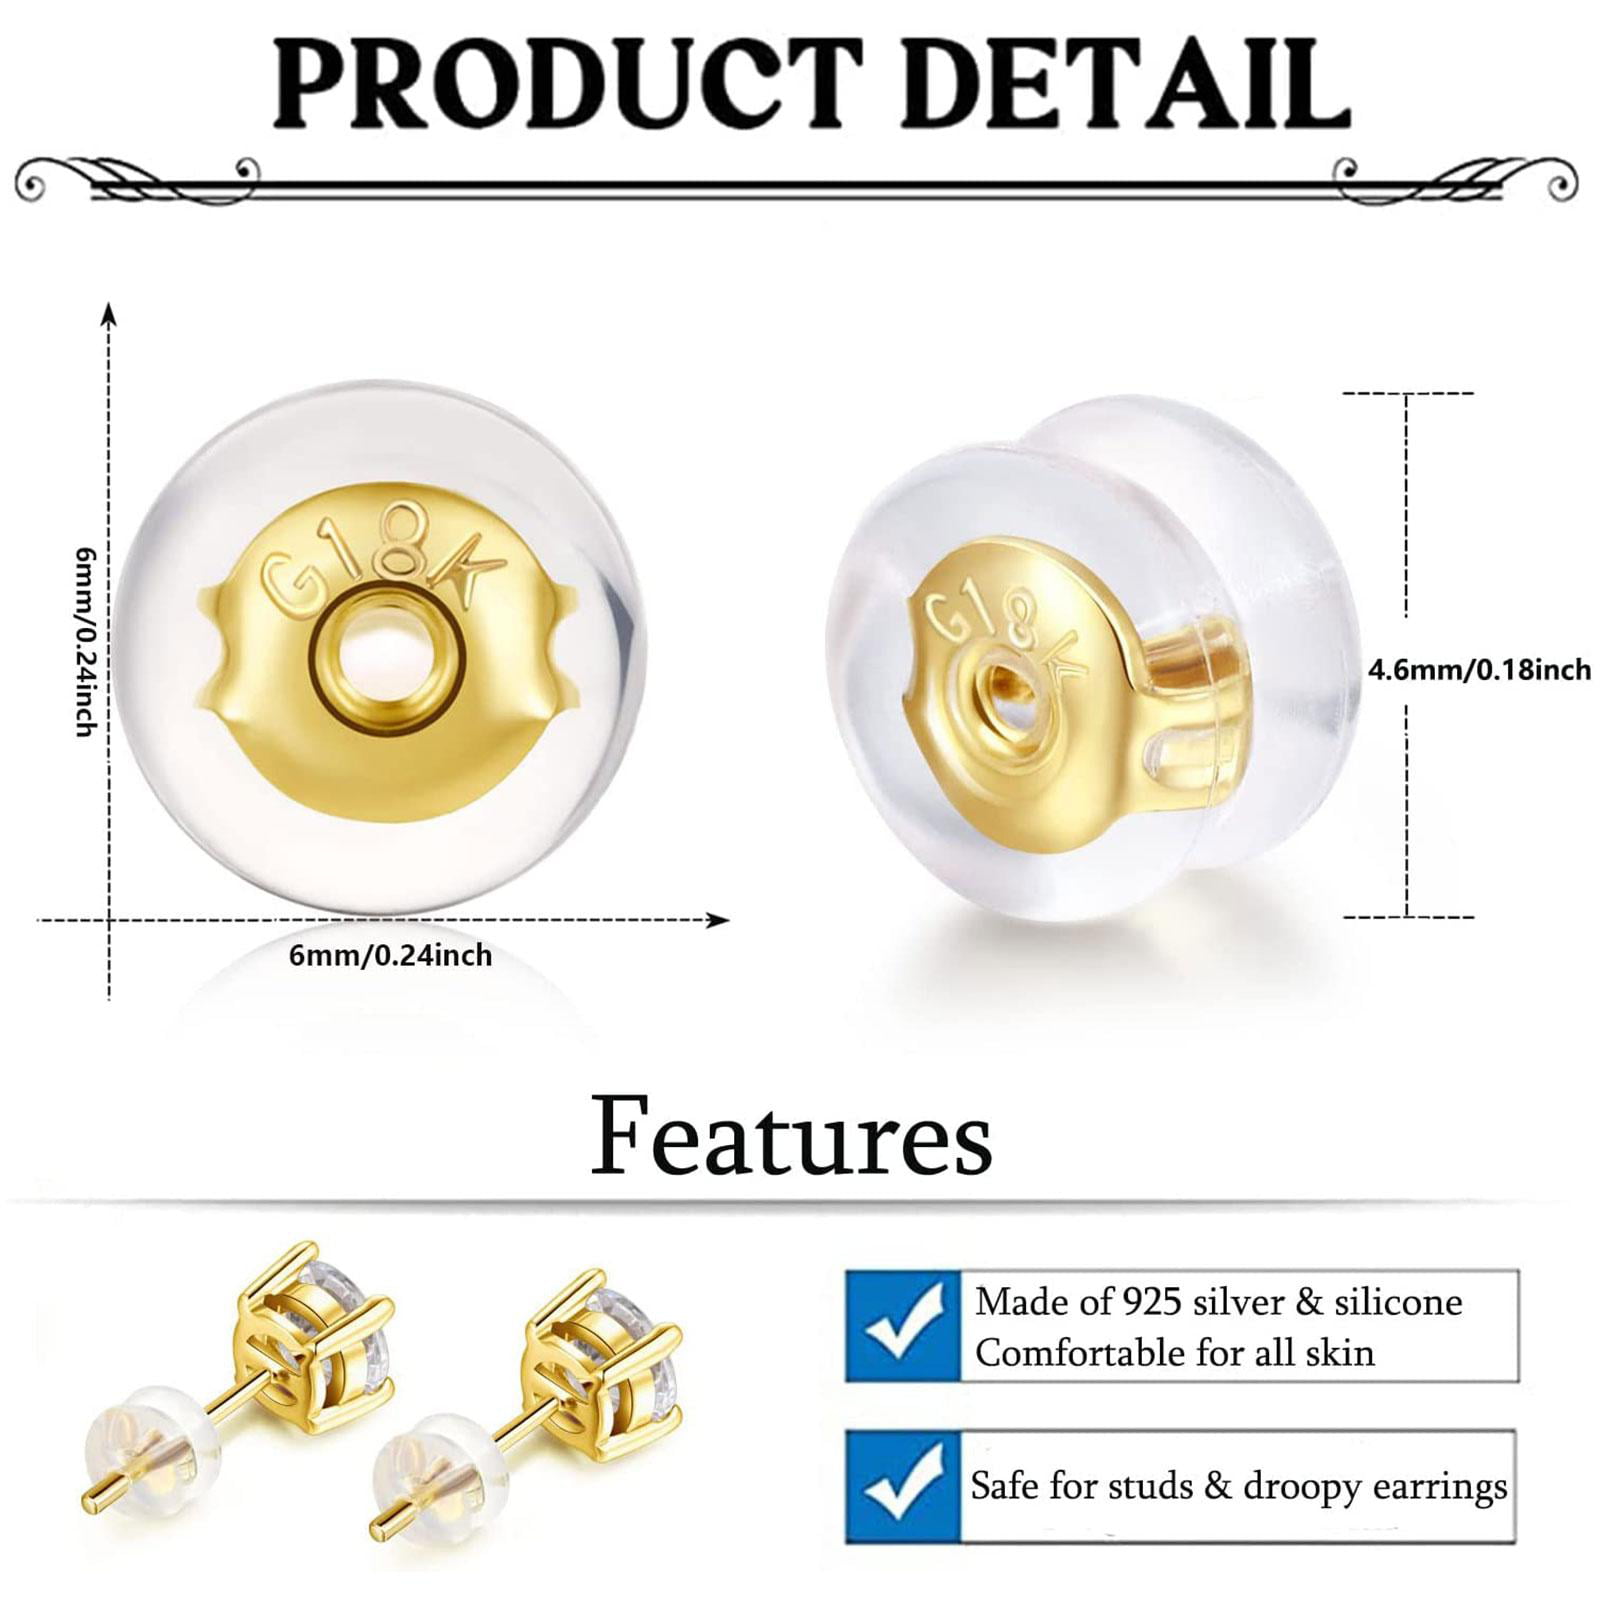 Gold Locking Secure Earring Backs for Studs, Silicone Earring